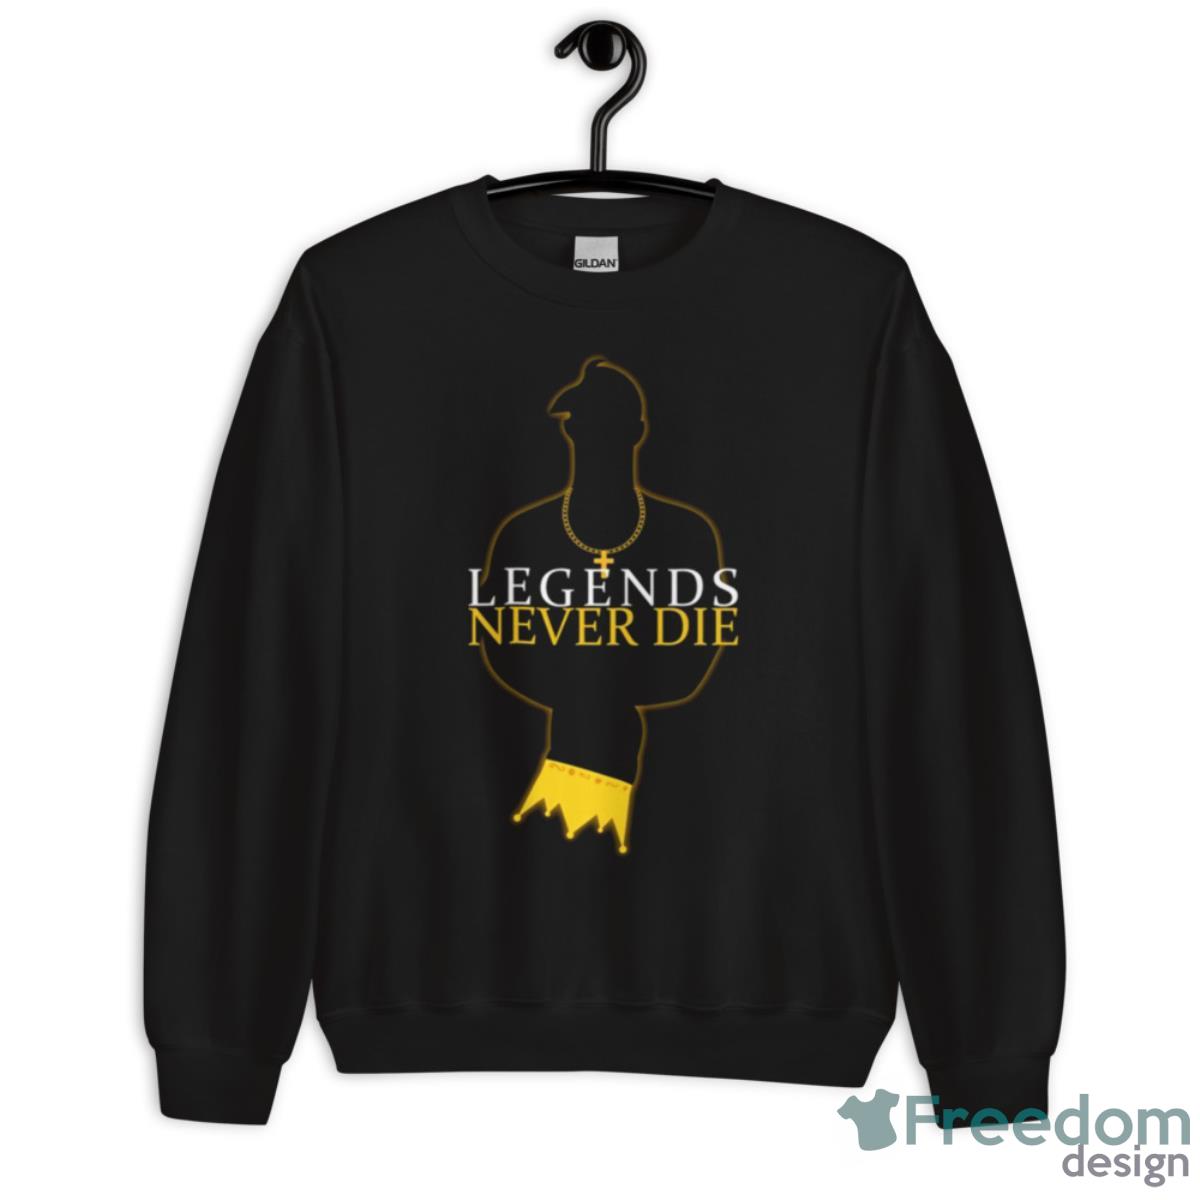 Tupac And Biggie Legends Never Die Design The Notorious B.I.G Biggie shirt